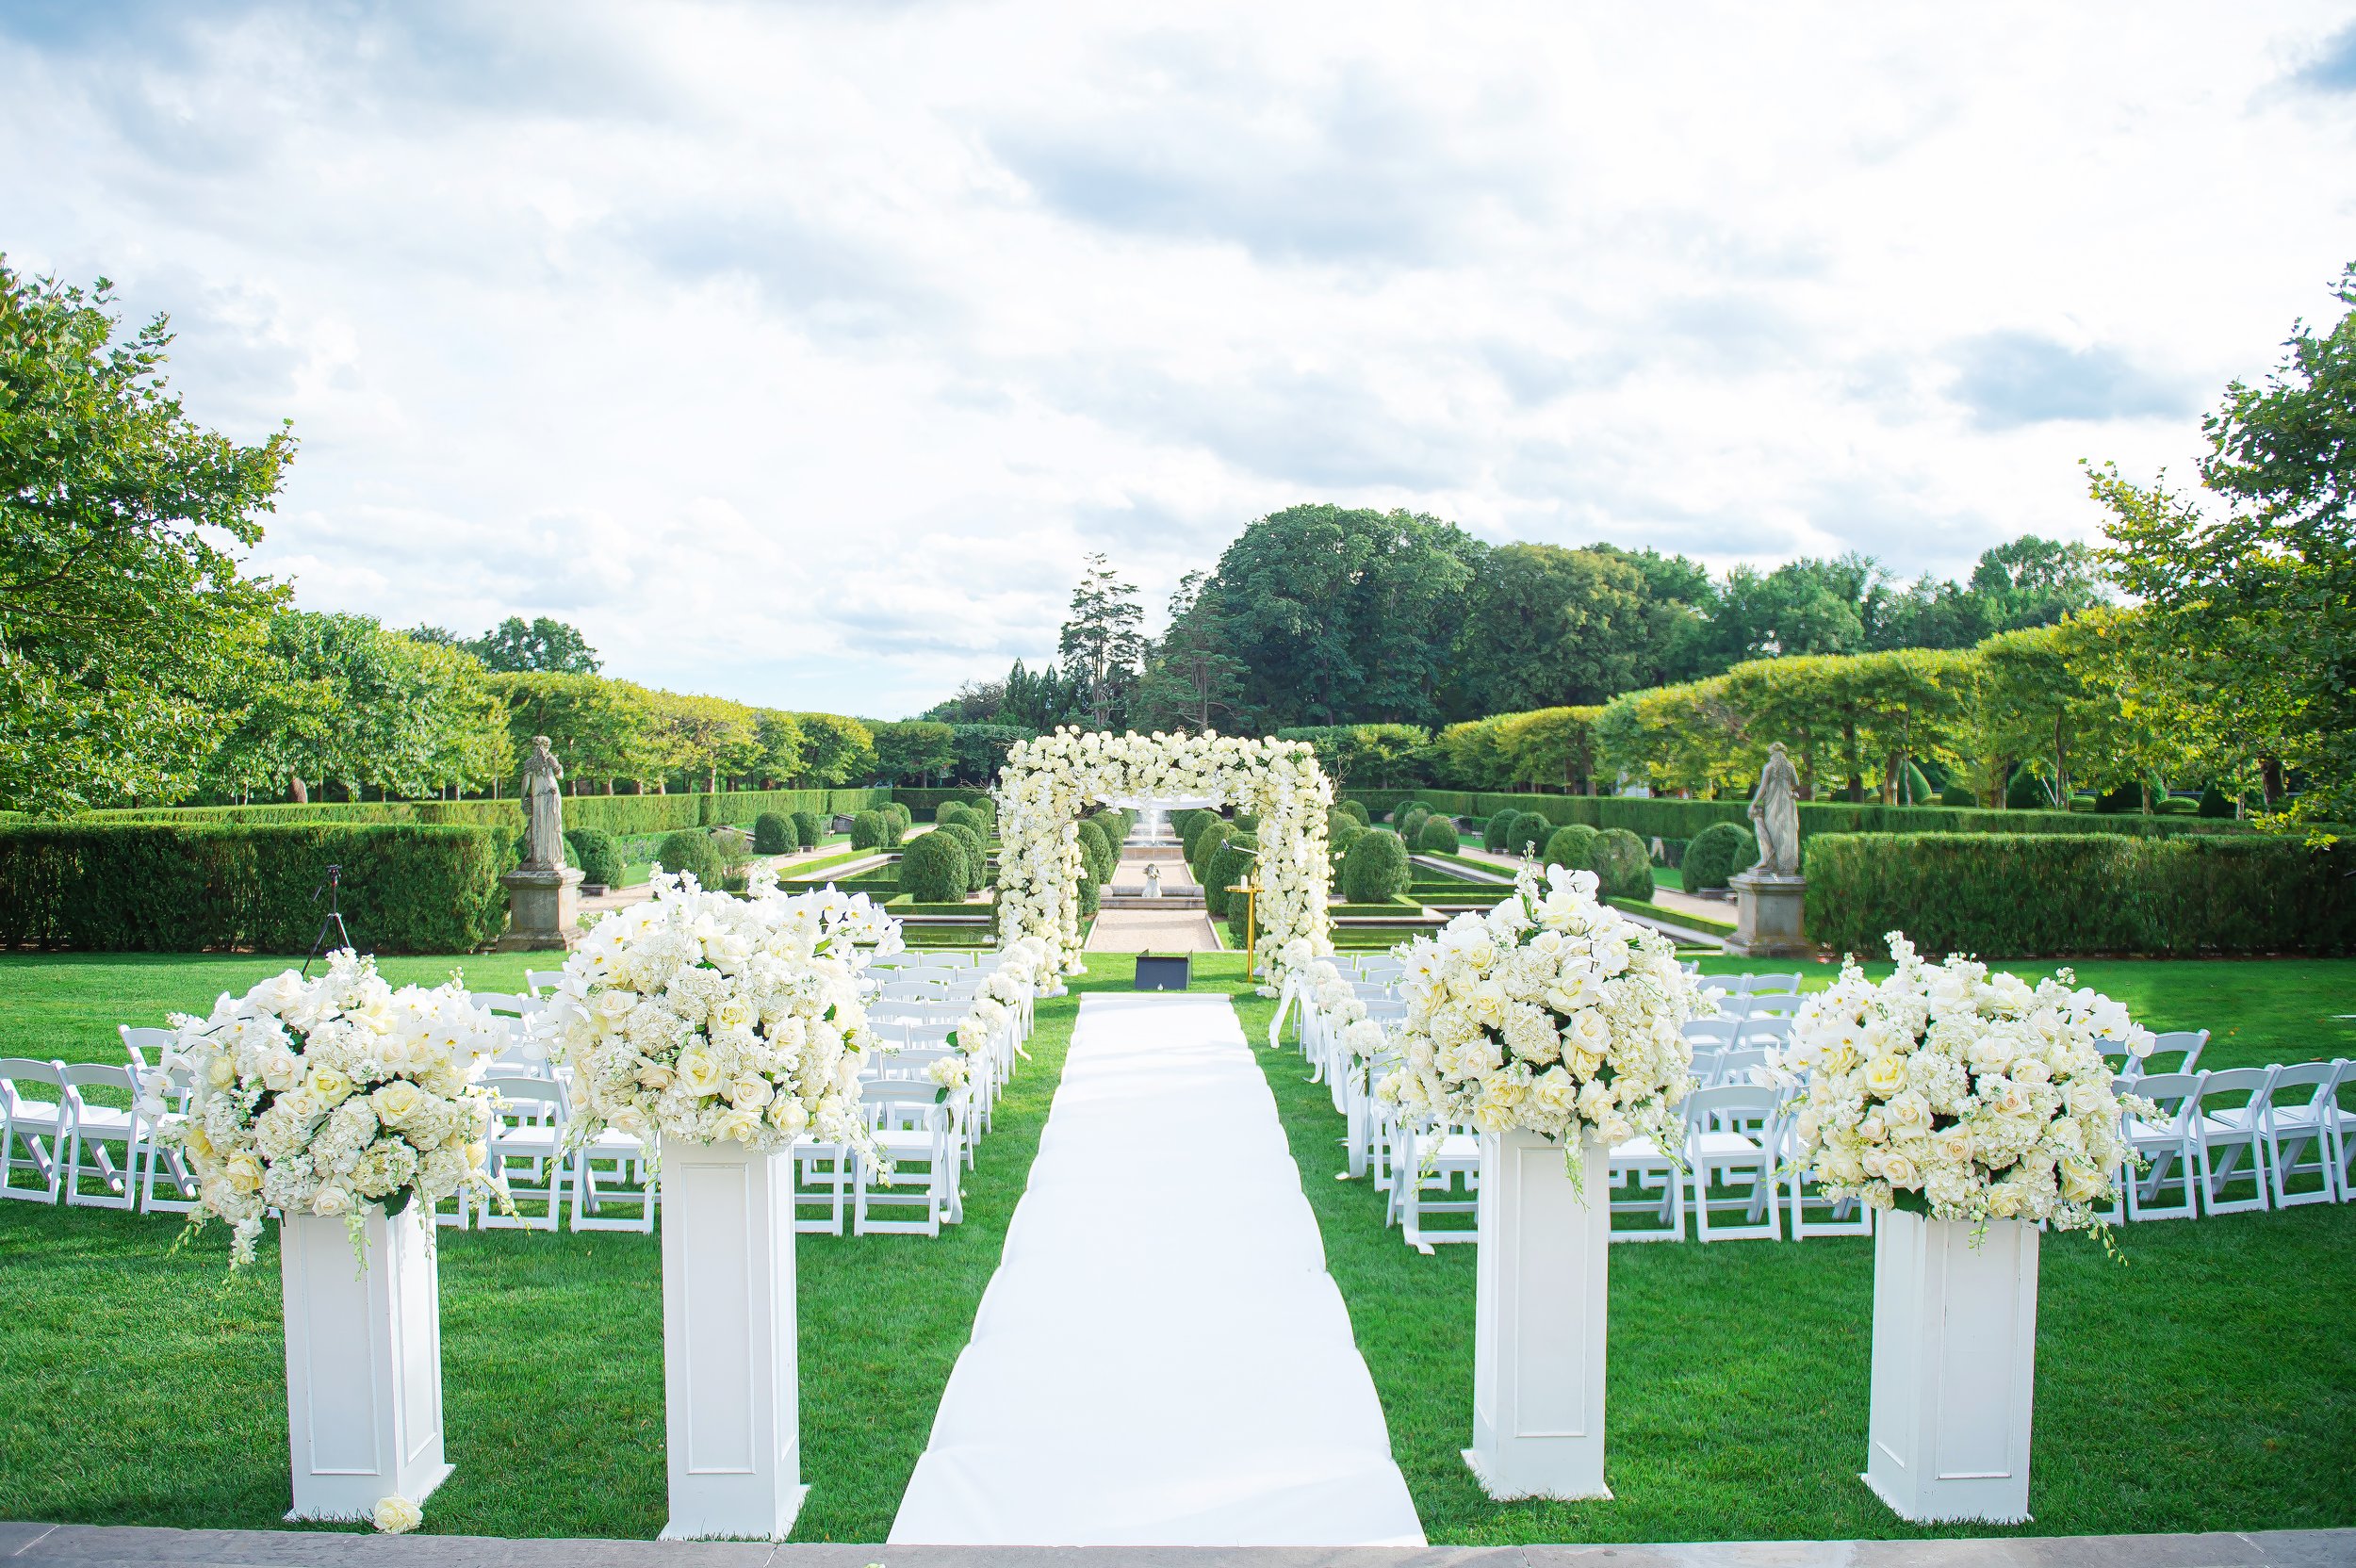 View of an aisle and the Chuppah